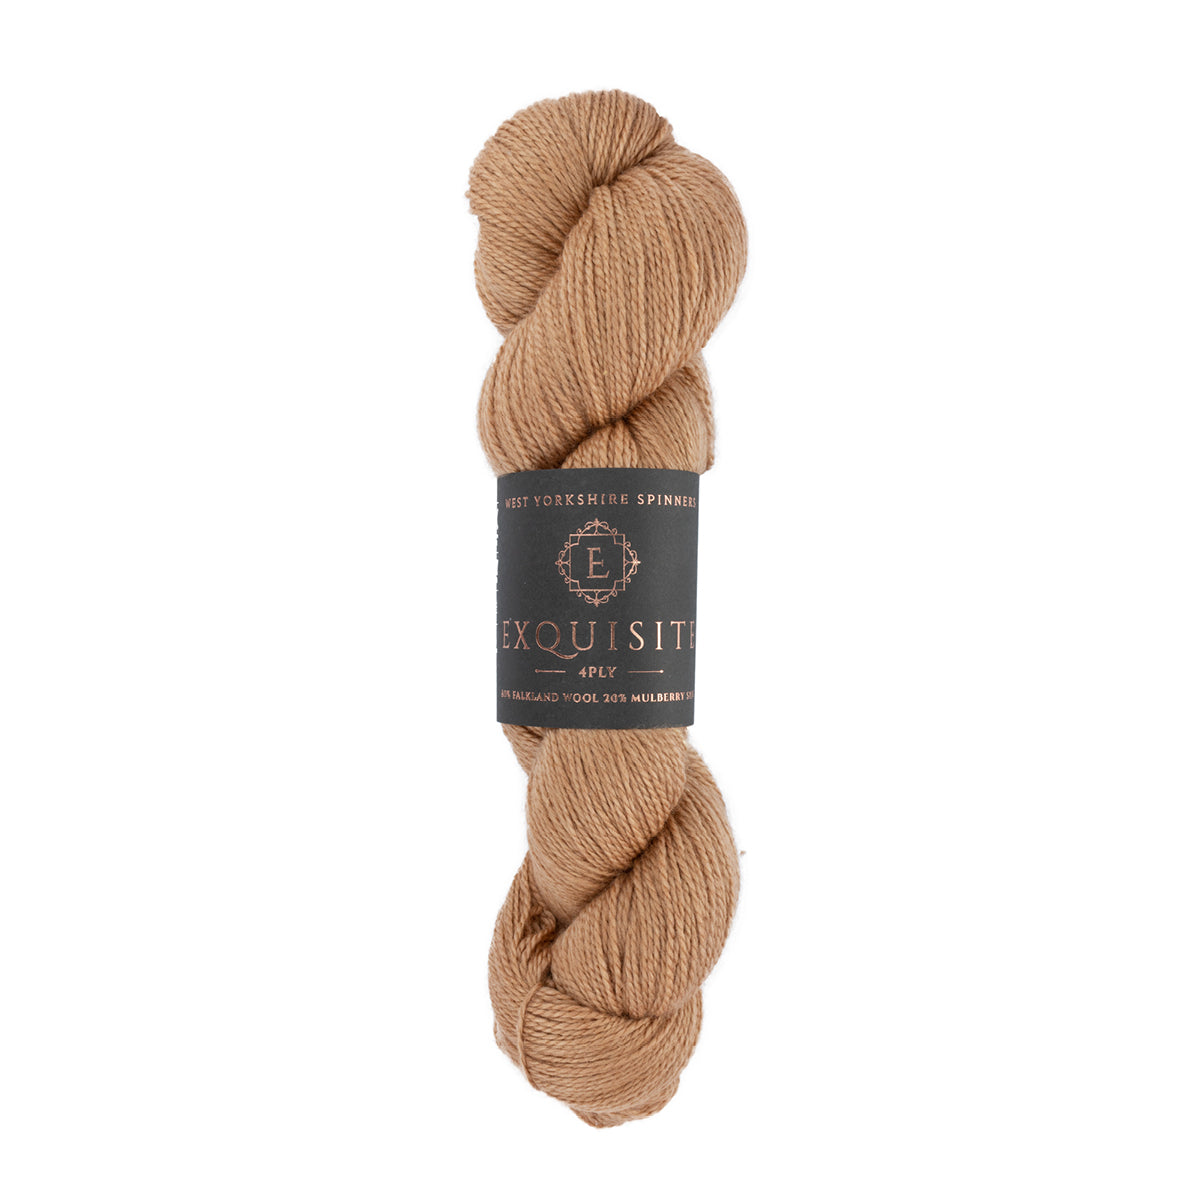 West Yorkshire Spinners - Exquisite 4 ply